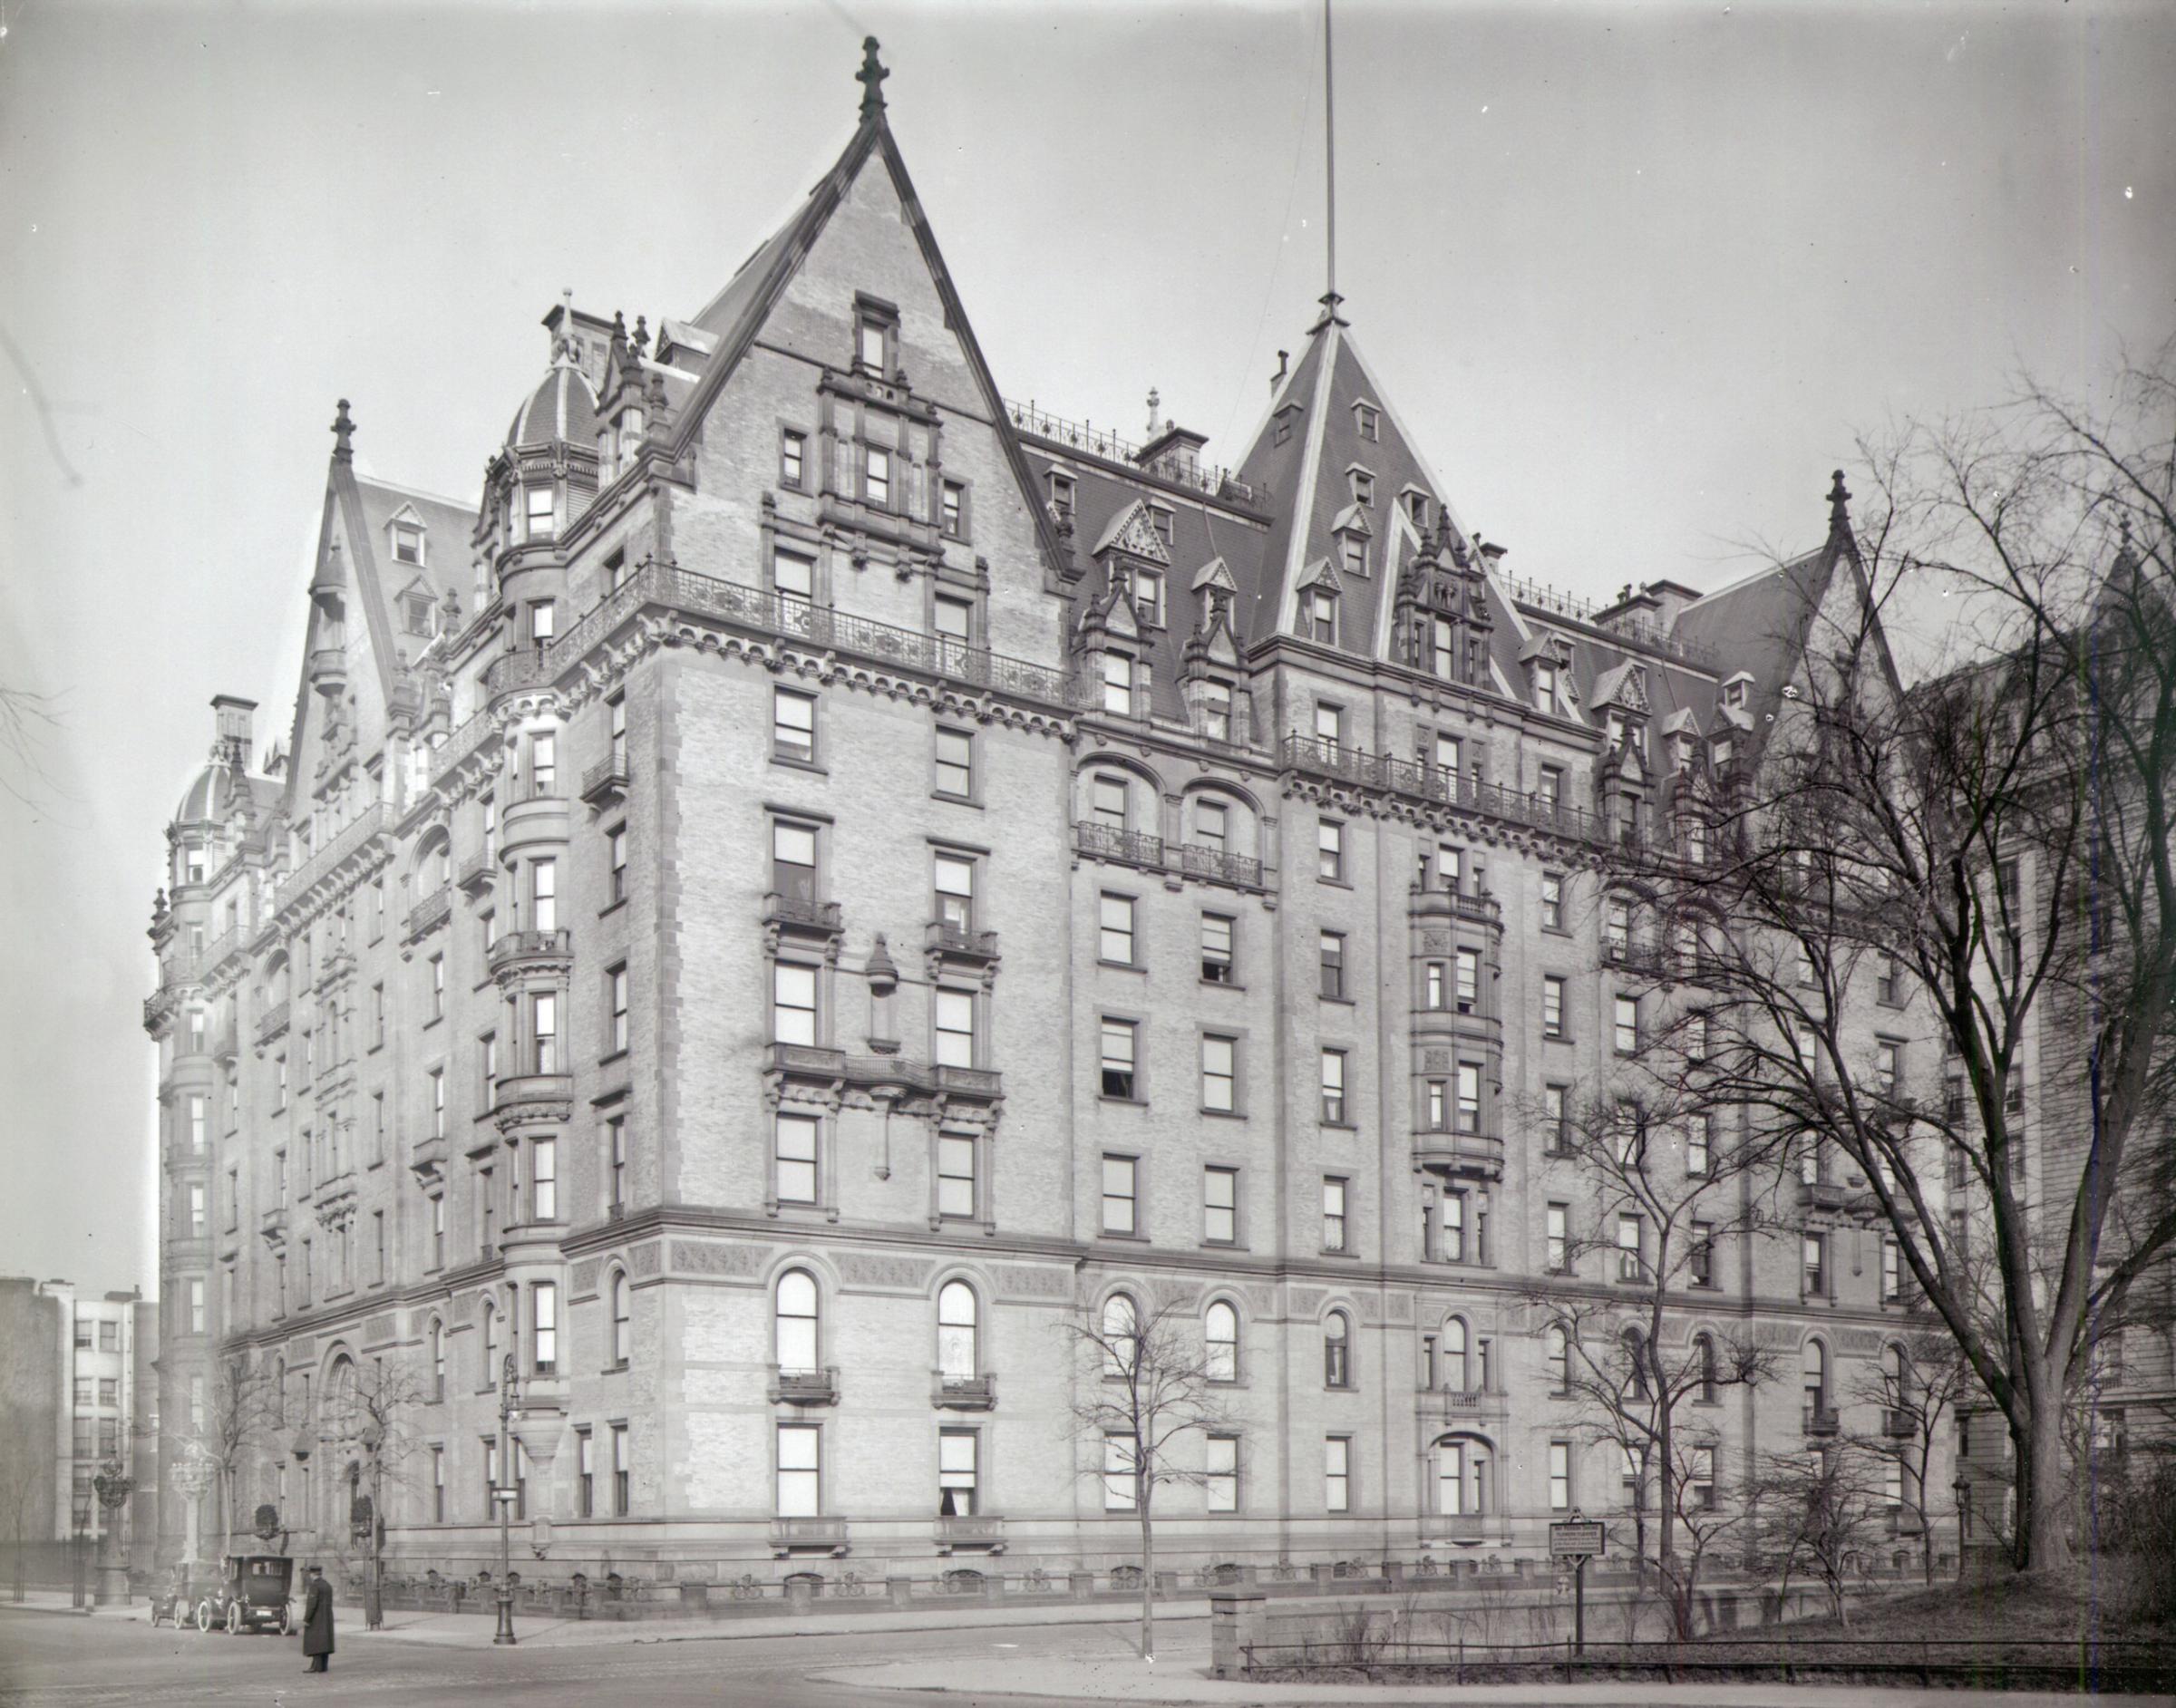 The photograph can be dated to about 1910 by the automobiles at the curb, and by the presence of the Langham Apartments at 135 Central Park West between 73rd and 74th Streets, which was completed in 1906. The sentry box for the guard has been replaced by a sign that warns visitors that “Any Person Taking Flowers or Leaves or defacing shrubbery in any Portion of the Park will be detained or Arrested and Punished.” The central gable on 72nd Street has now gained another small dormer window, and the south side of the central gable on Central Park West has single one near the top as well.